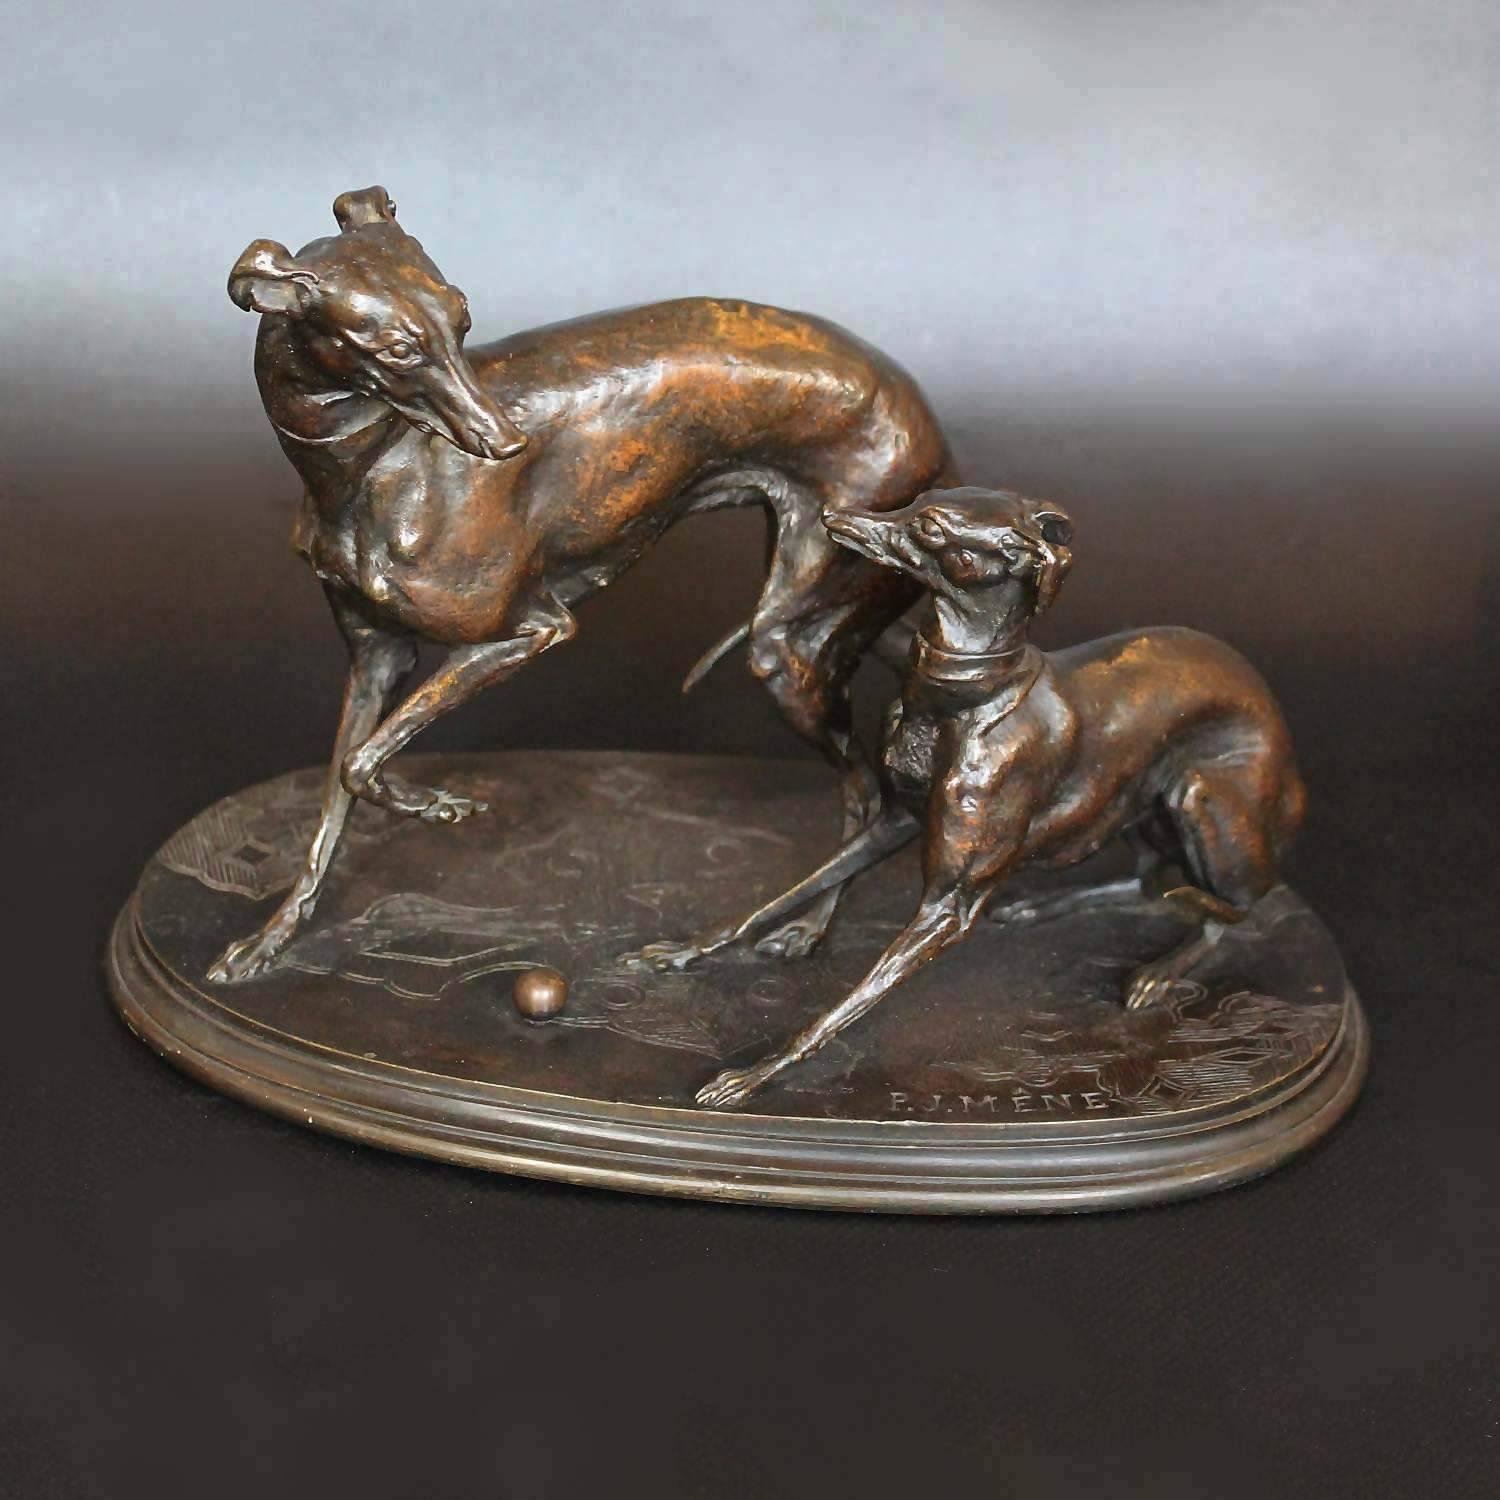 Jiji et Giselle, a patinated bronze group of two whippets at play. Set over an integral base with engraved detail. 

Artist: Pierre-Jules Mêne (1810-1879)

Literature: M. Poletti & A Richarme 'Pierre-Jules Mêne Catalogue Raisonné' p.128

 